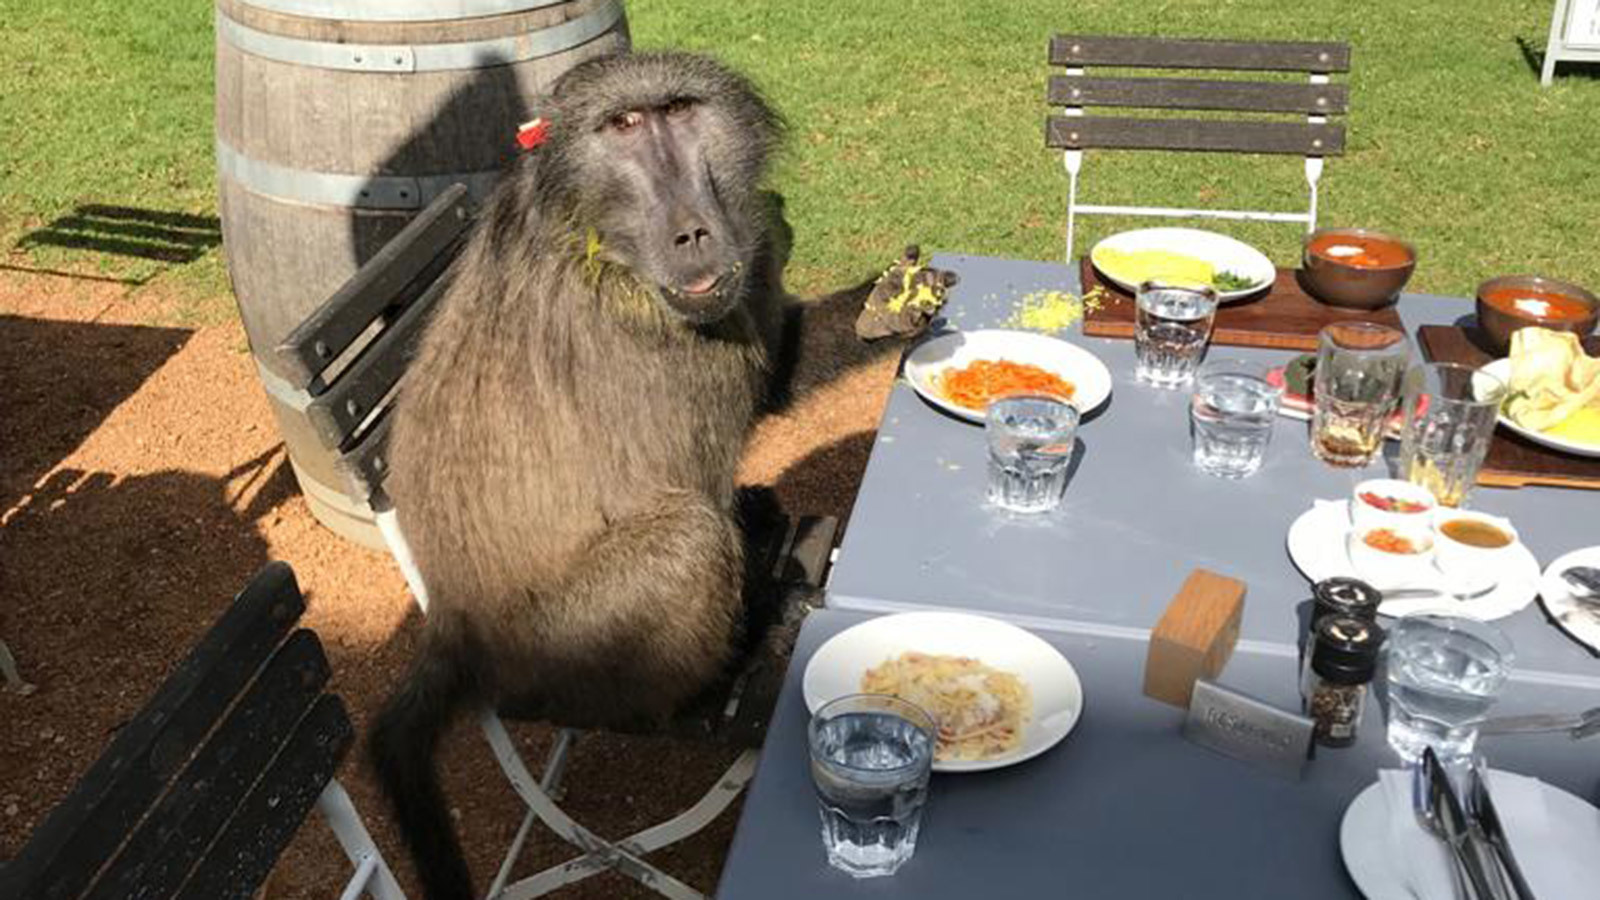 Discerning Baboon Stops To Dine At Cape Winery: ‘this One Clearly Loved Italian Cuisine’ photo